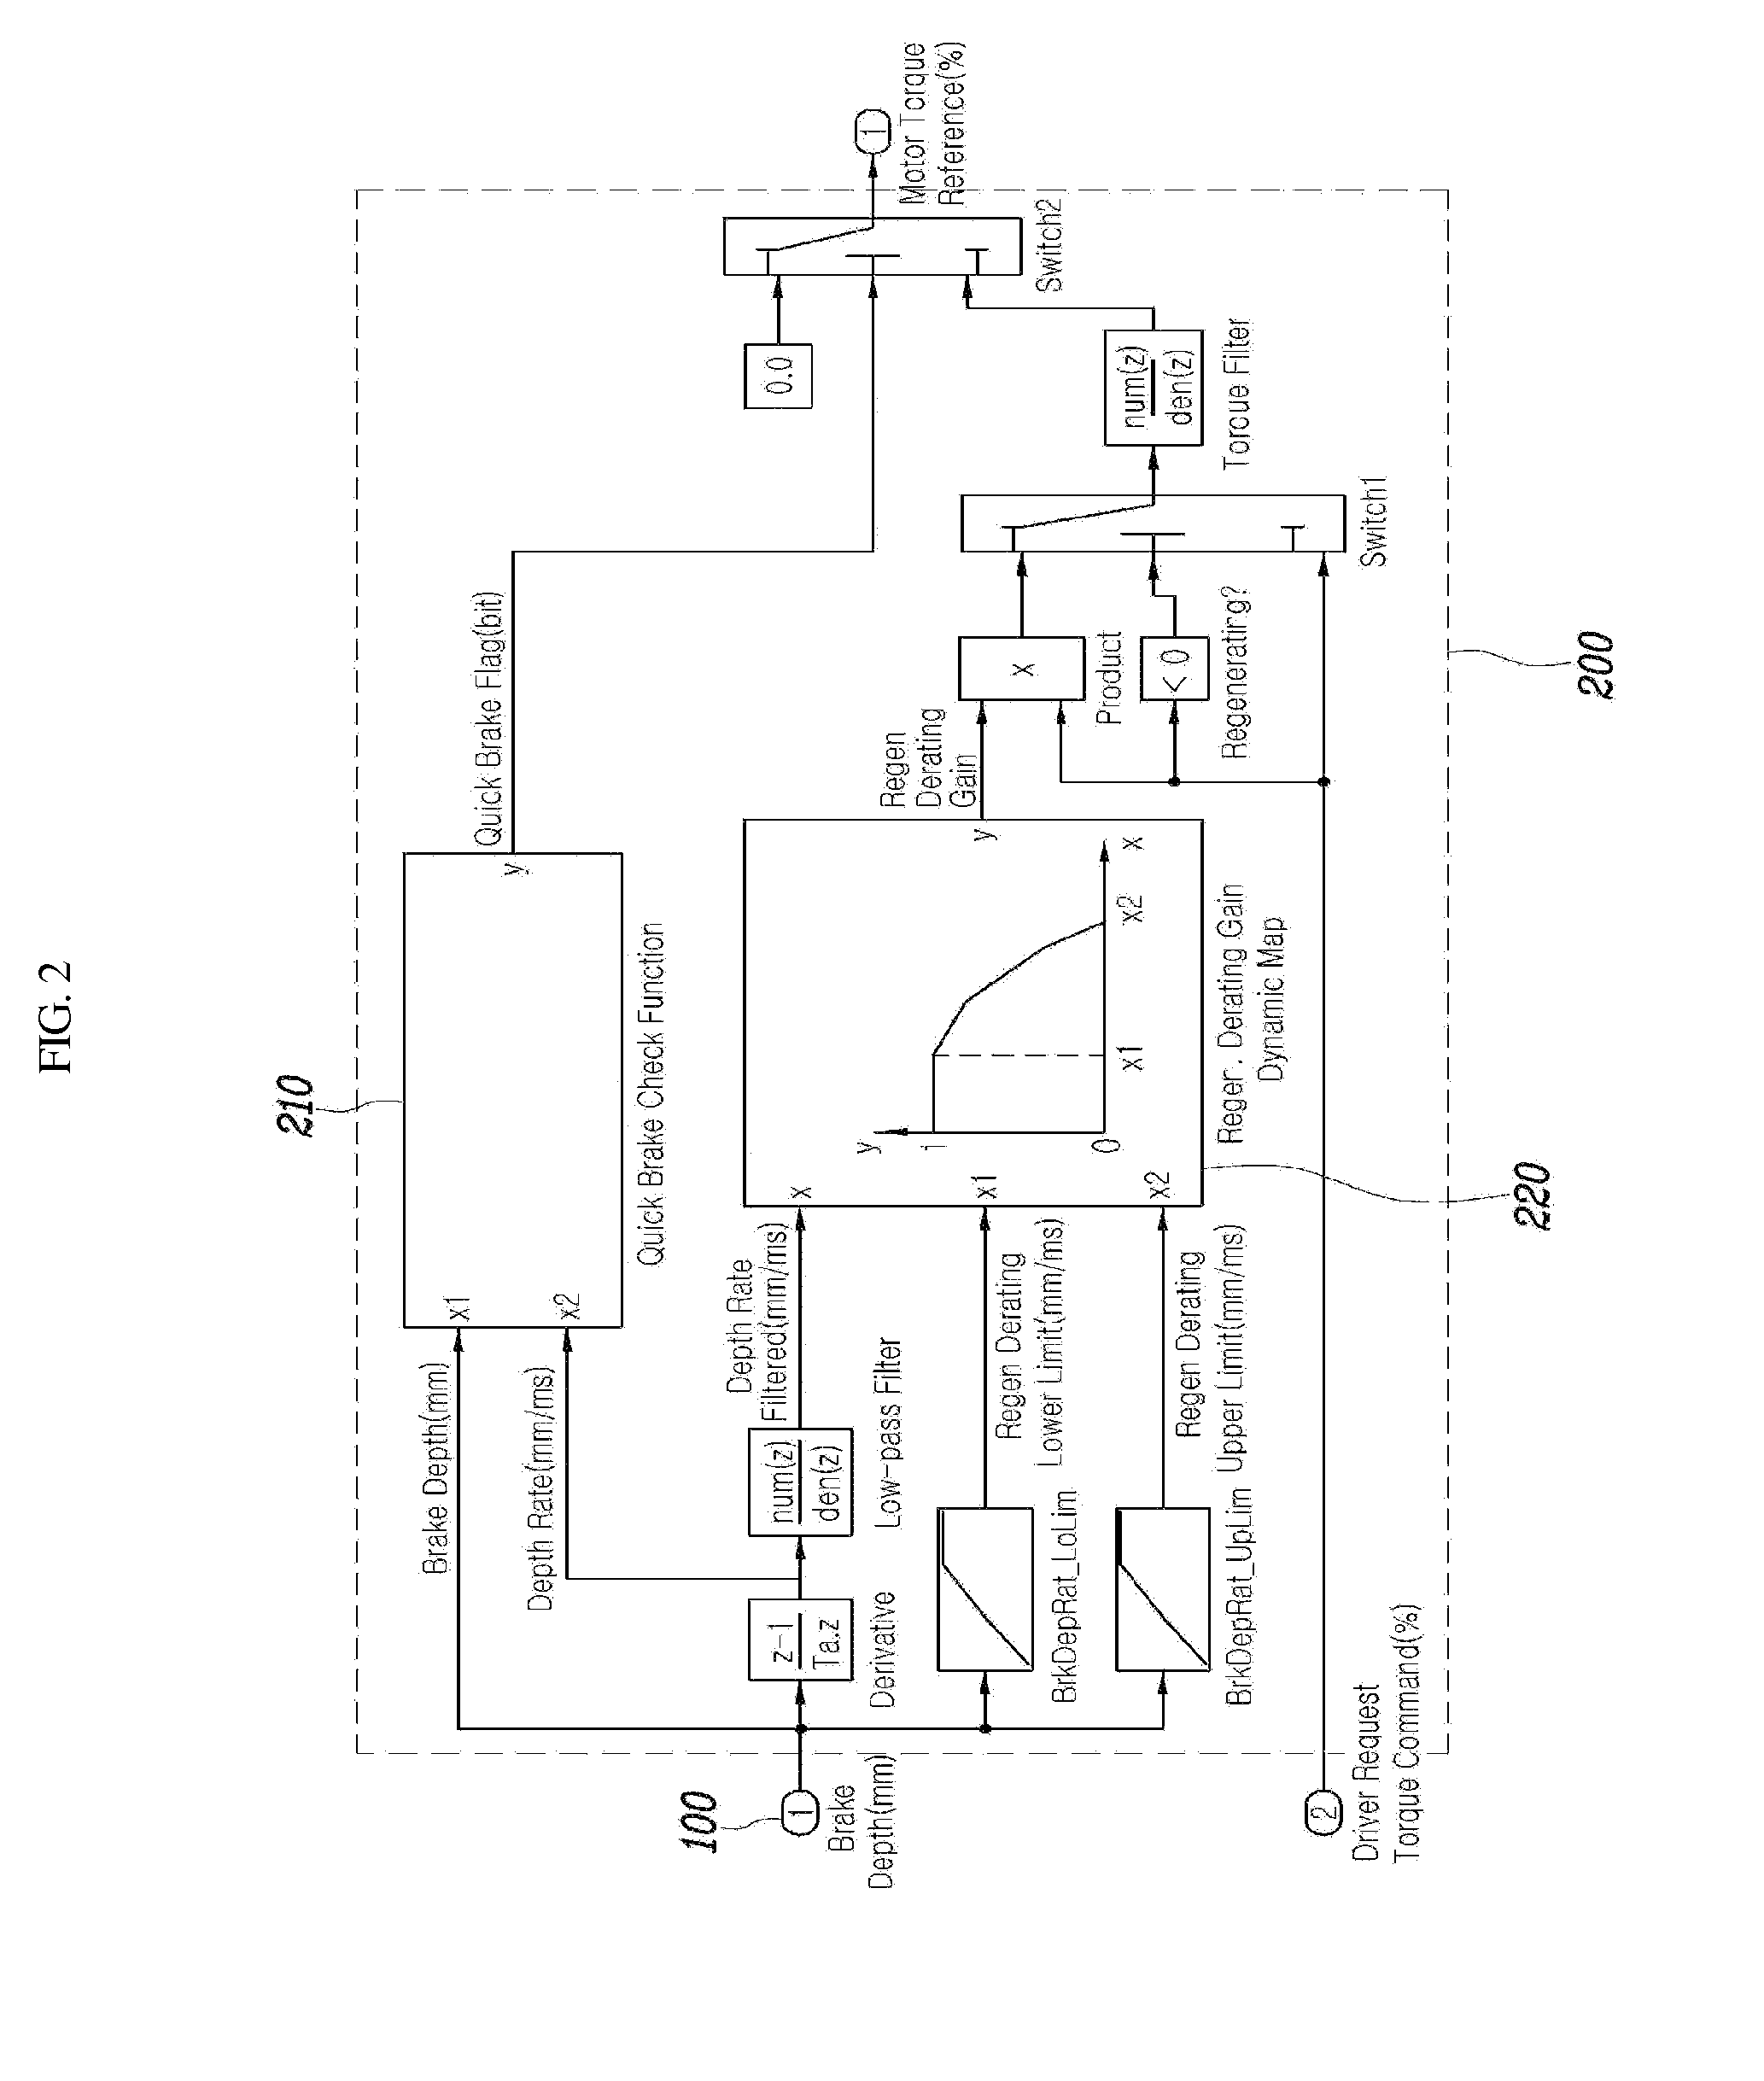 Method and apparatus for controlling drive motor